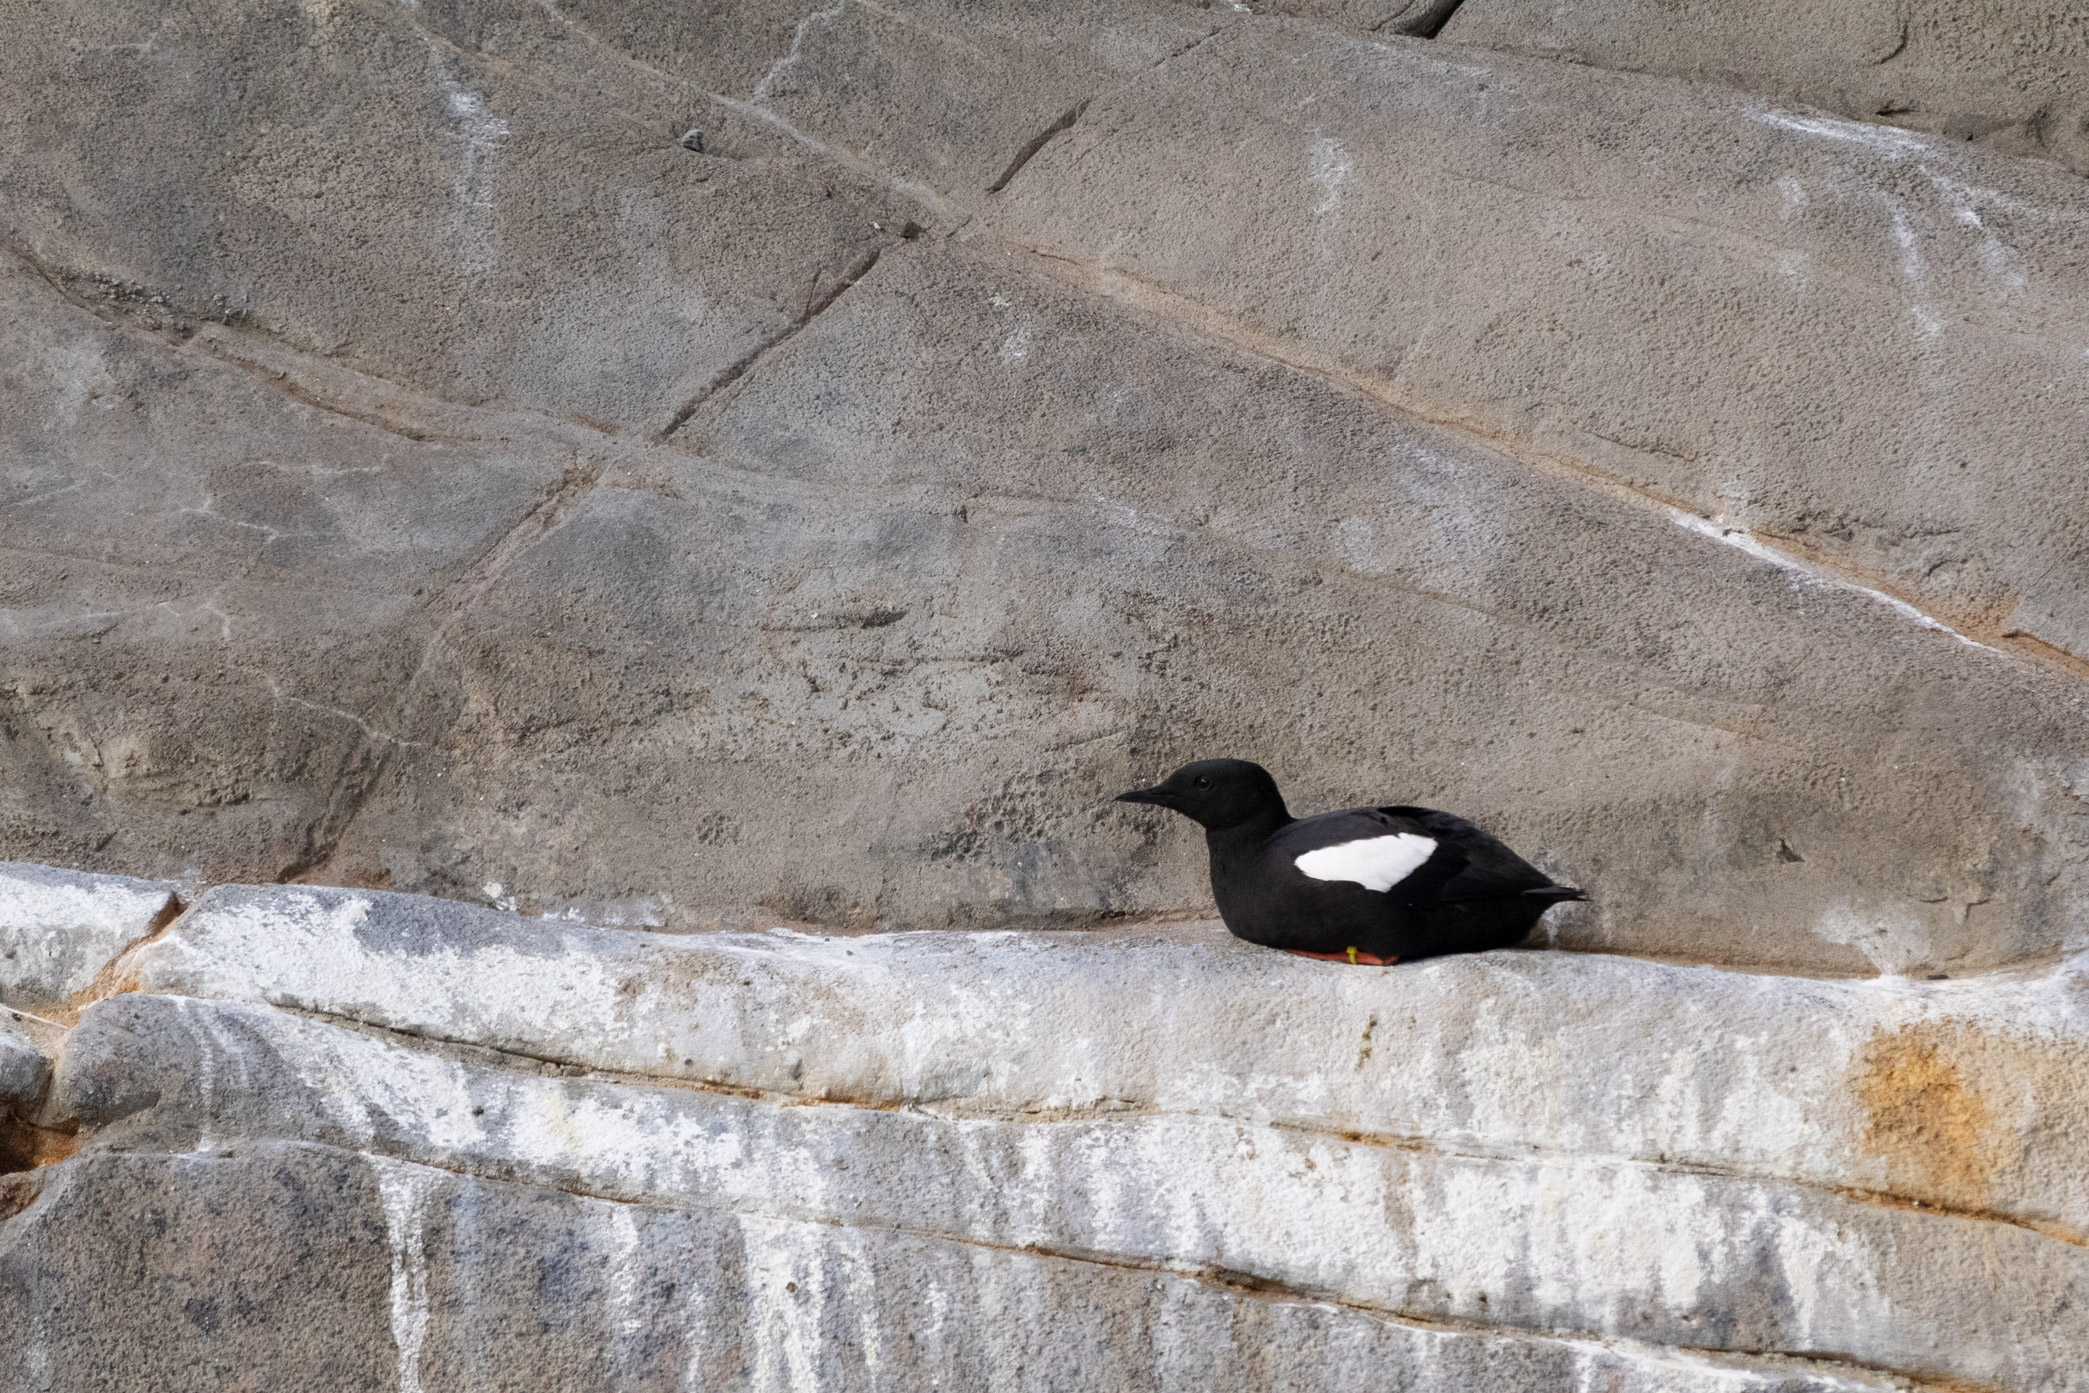 Black bird with white bands on its wings sitting on a cliff face